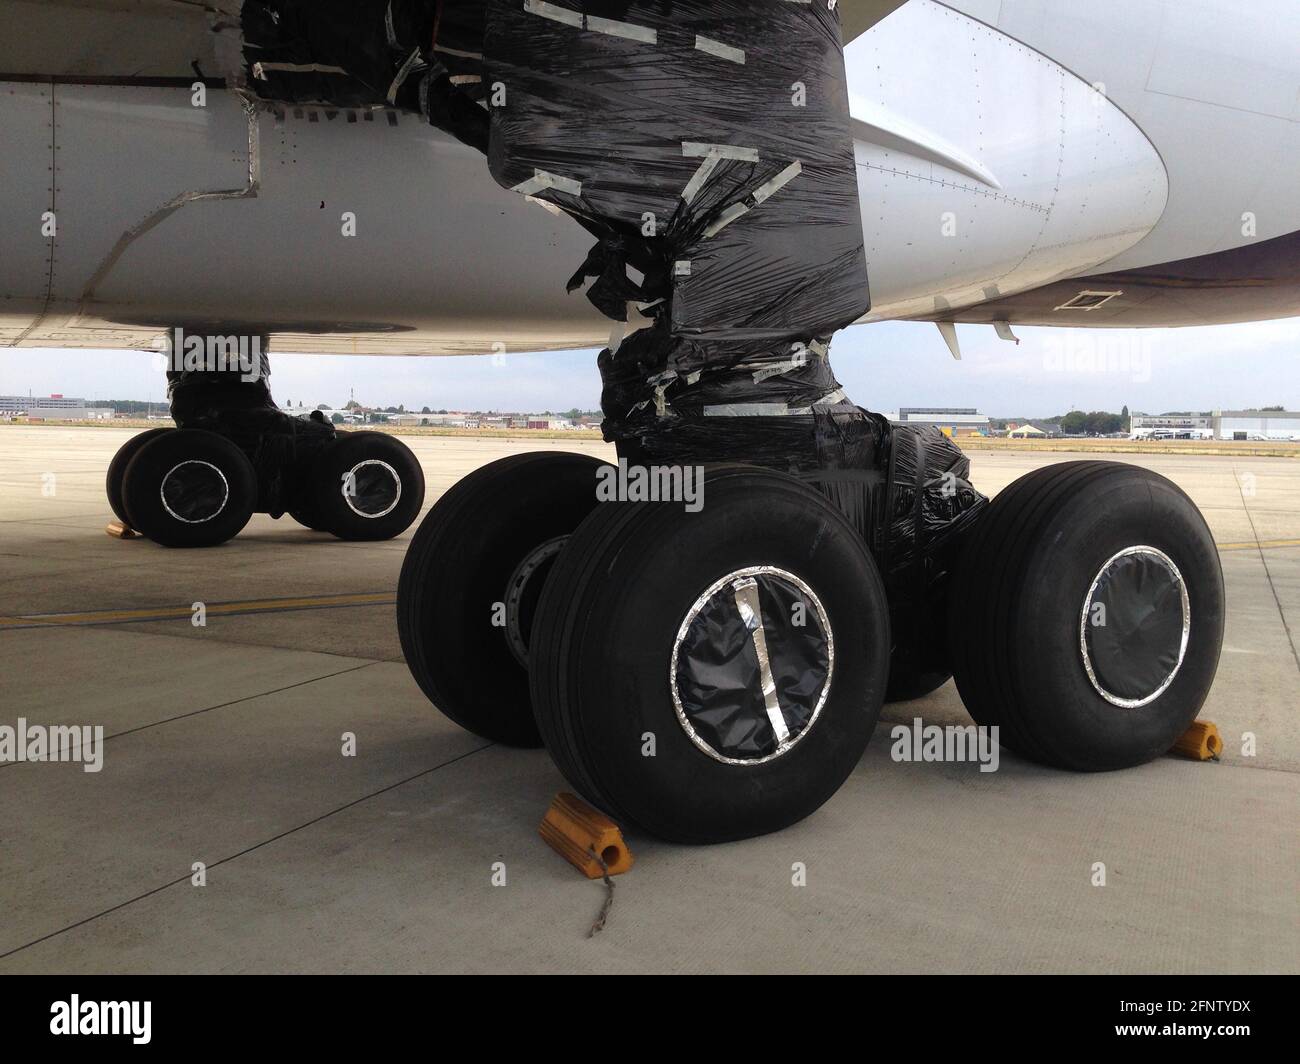 aircraft landing gear sealed off to protect from bird nesting during long term storage Stock Photo